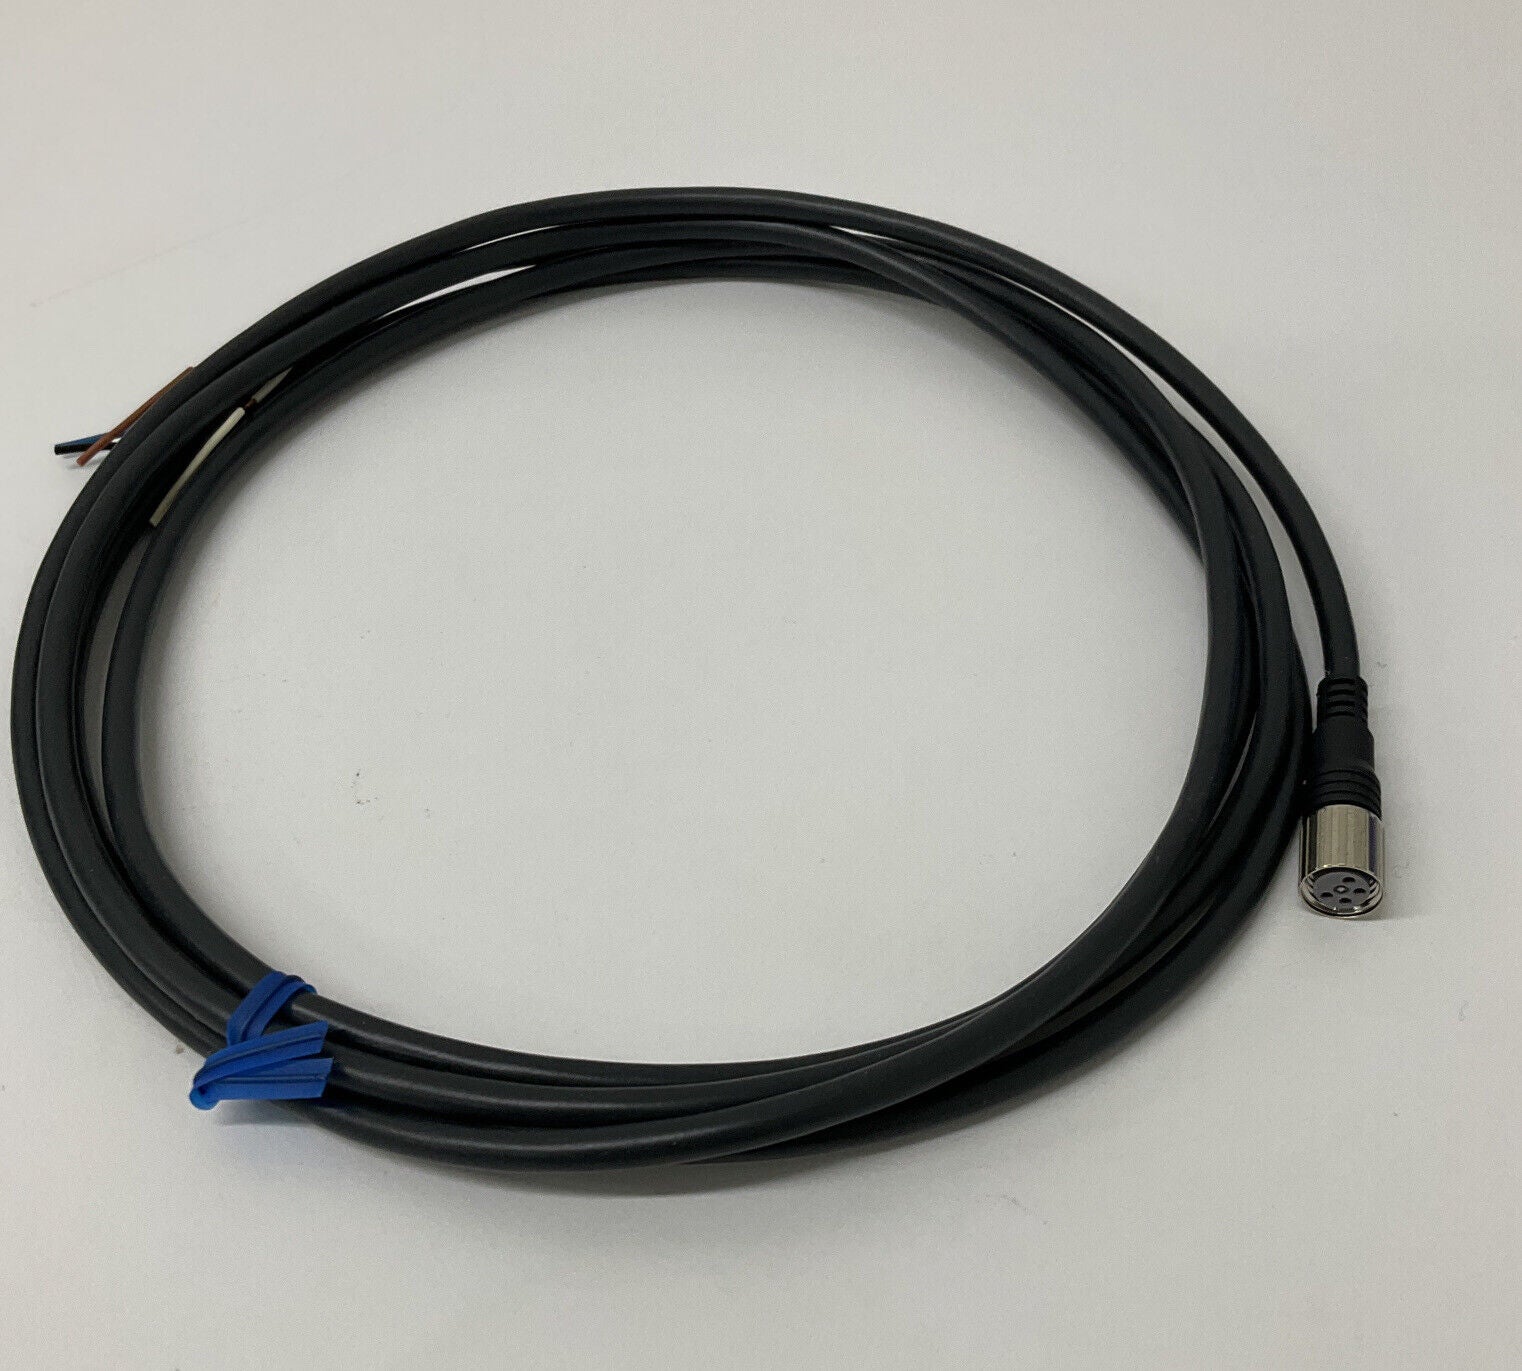 Omron XS3F-M421-402-A  2Meter  3. pole Sensor Cable (RE131)